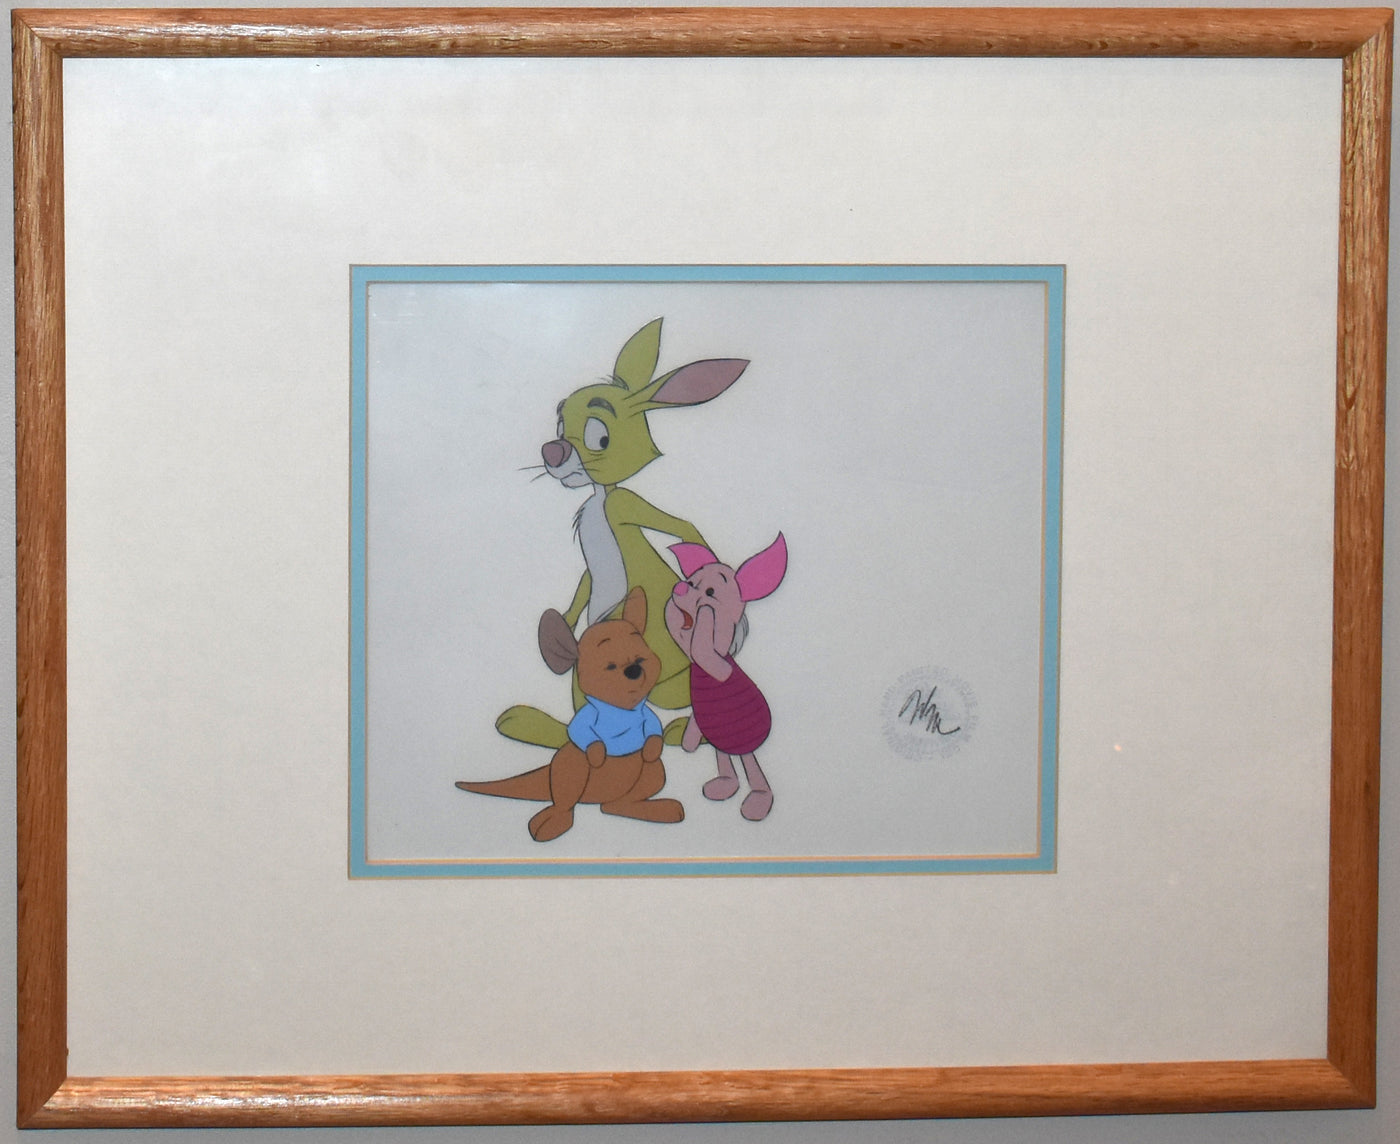 Original Walt Disney Production Cel from Winnie the Pooh and A Day for Eeyore featuring Rabbit, Piglet, and Roo